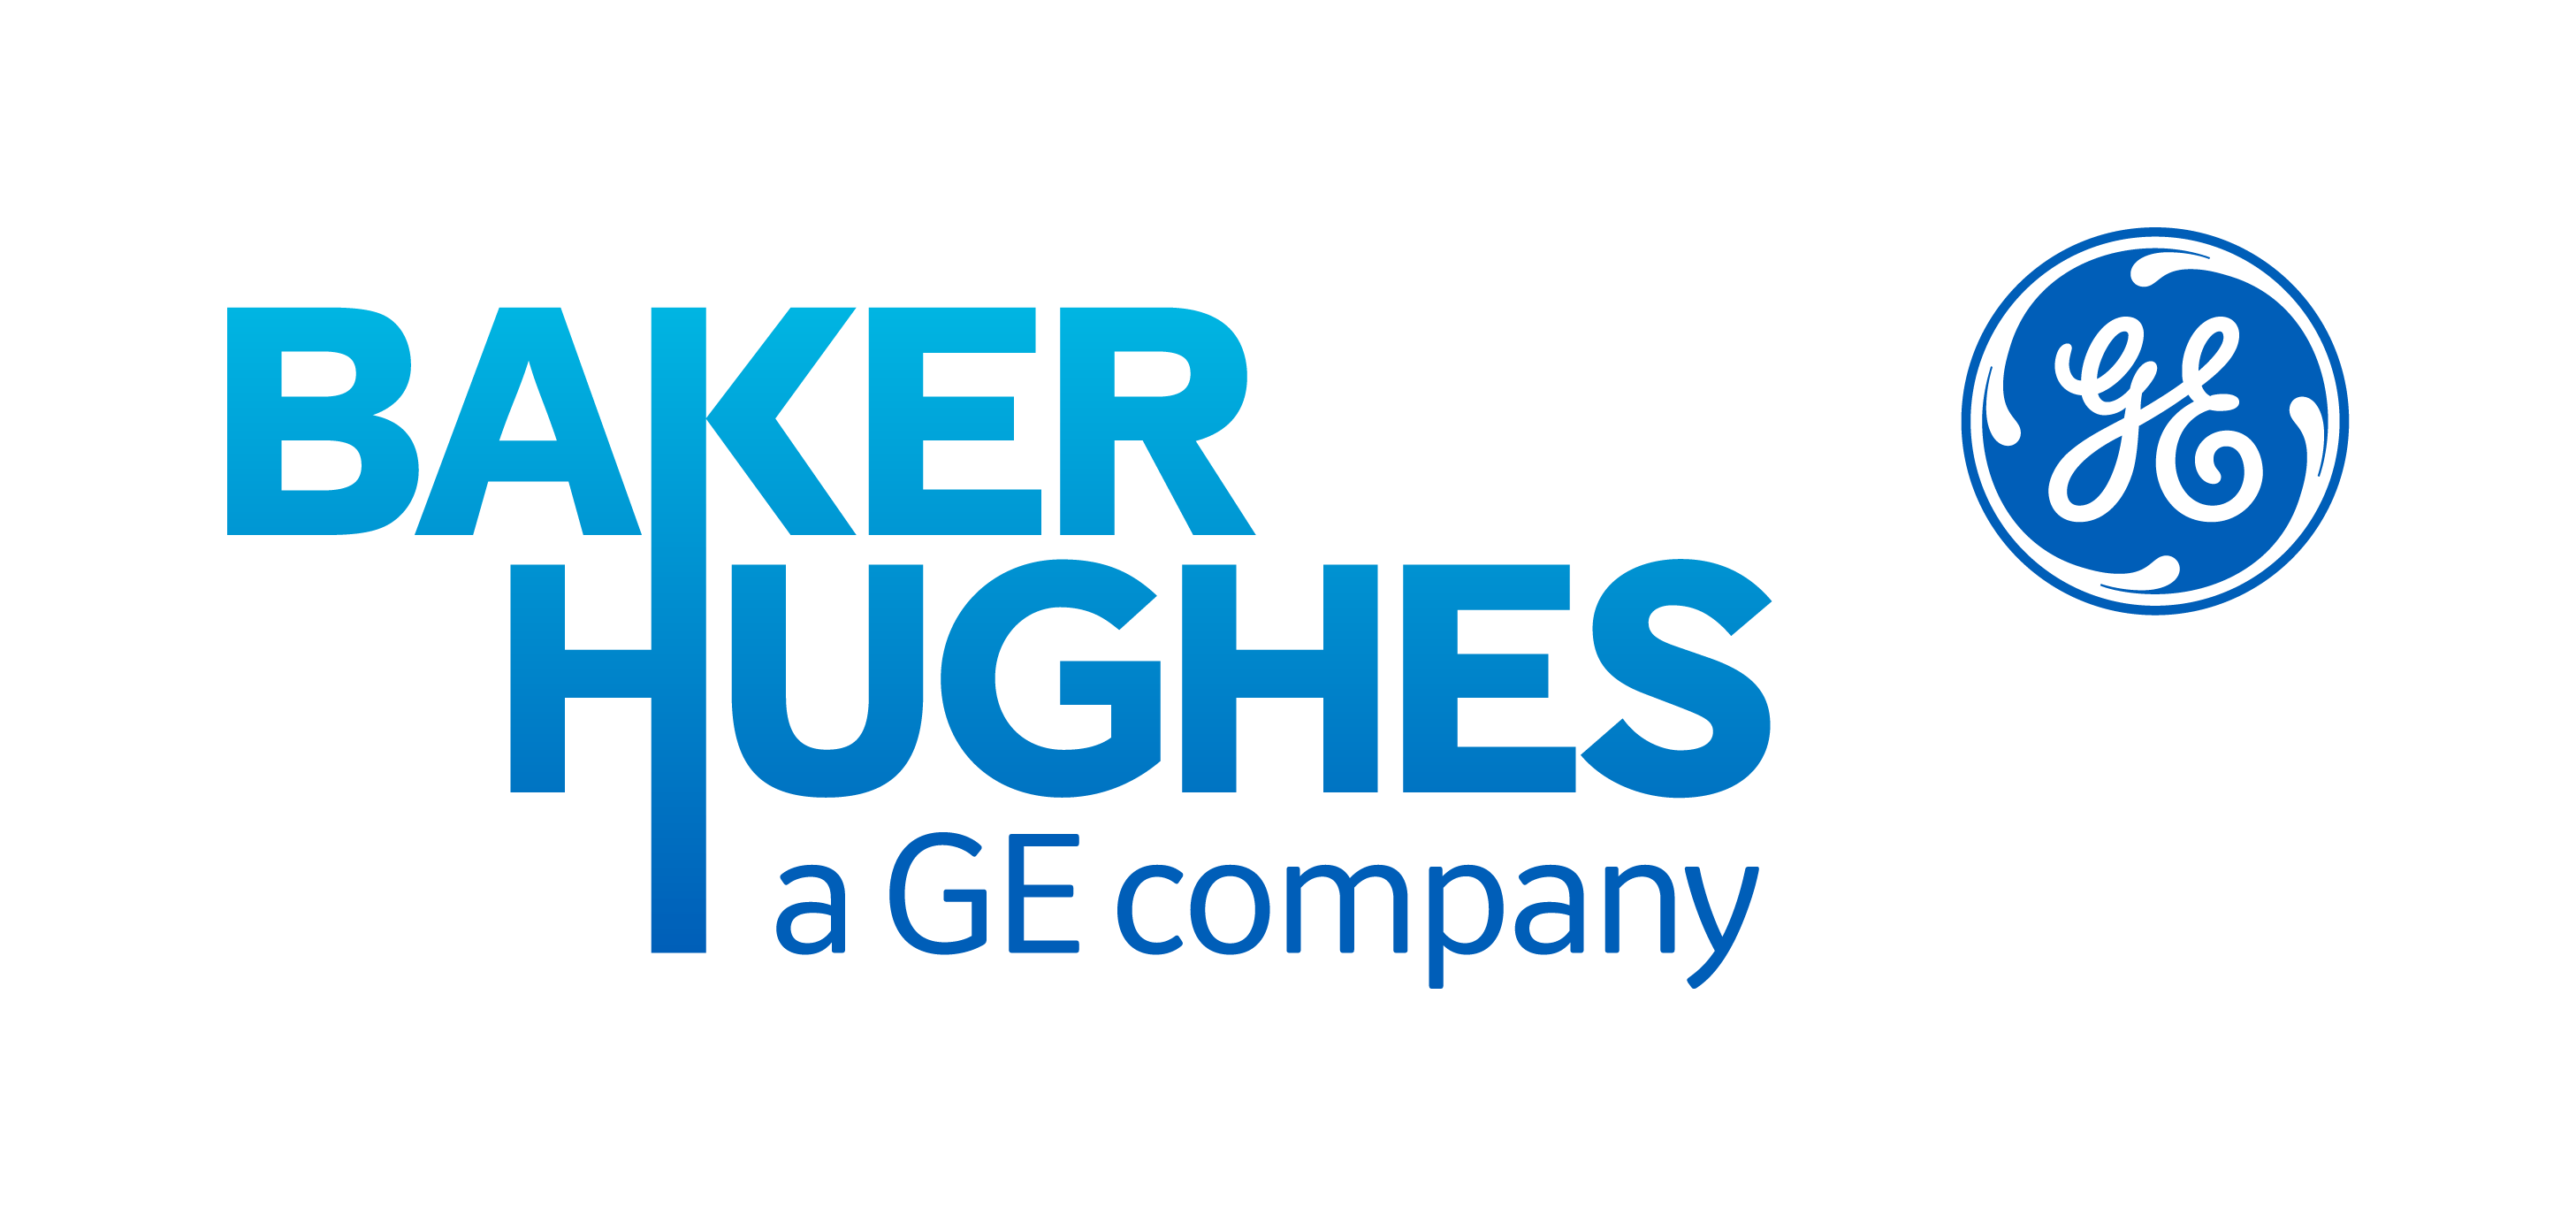 GE Company Logo - Baker Hughes and GE Oil & Gas Complete Merger